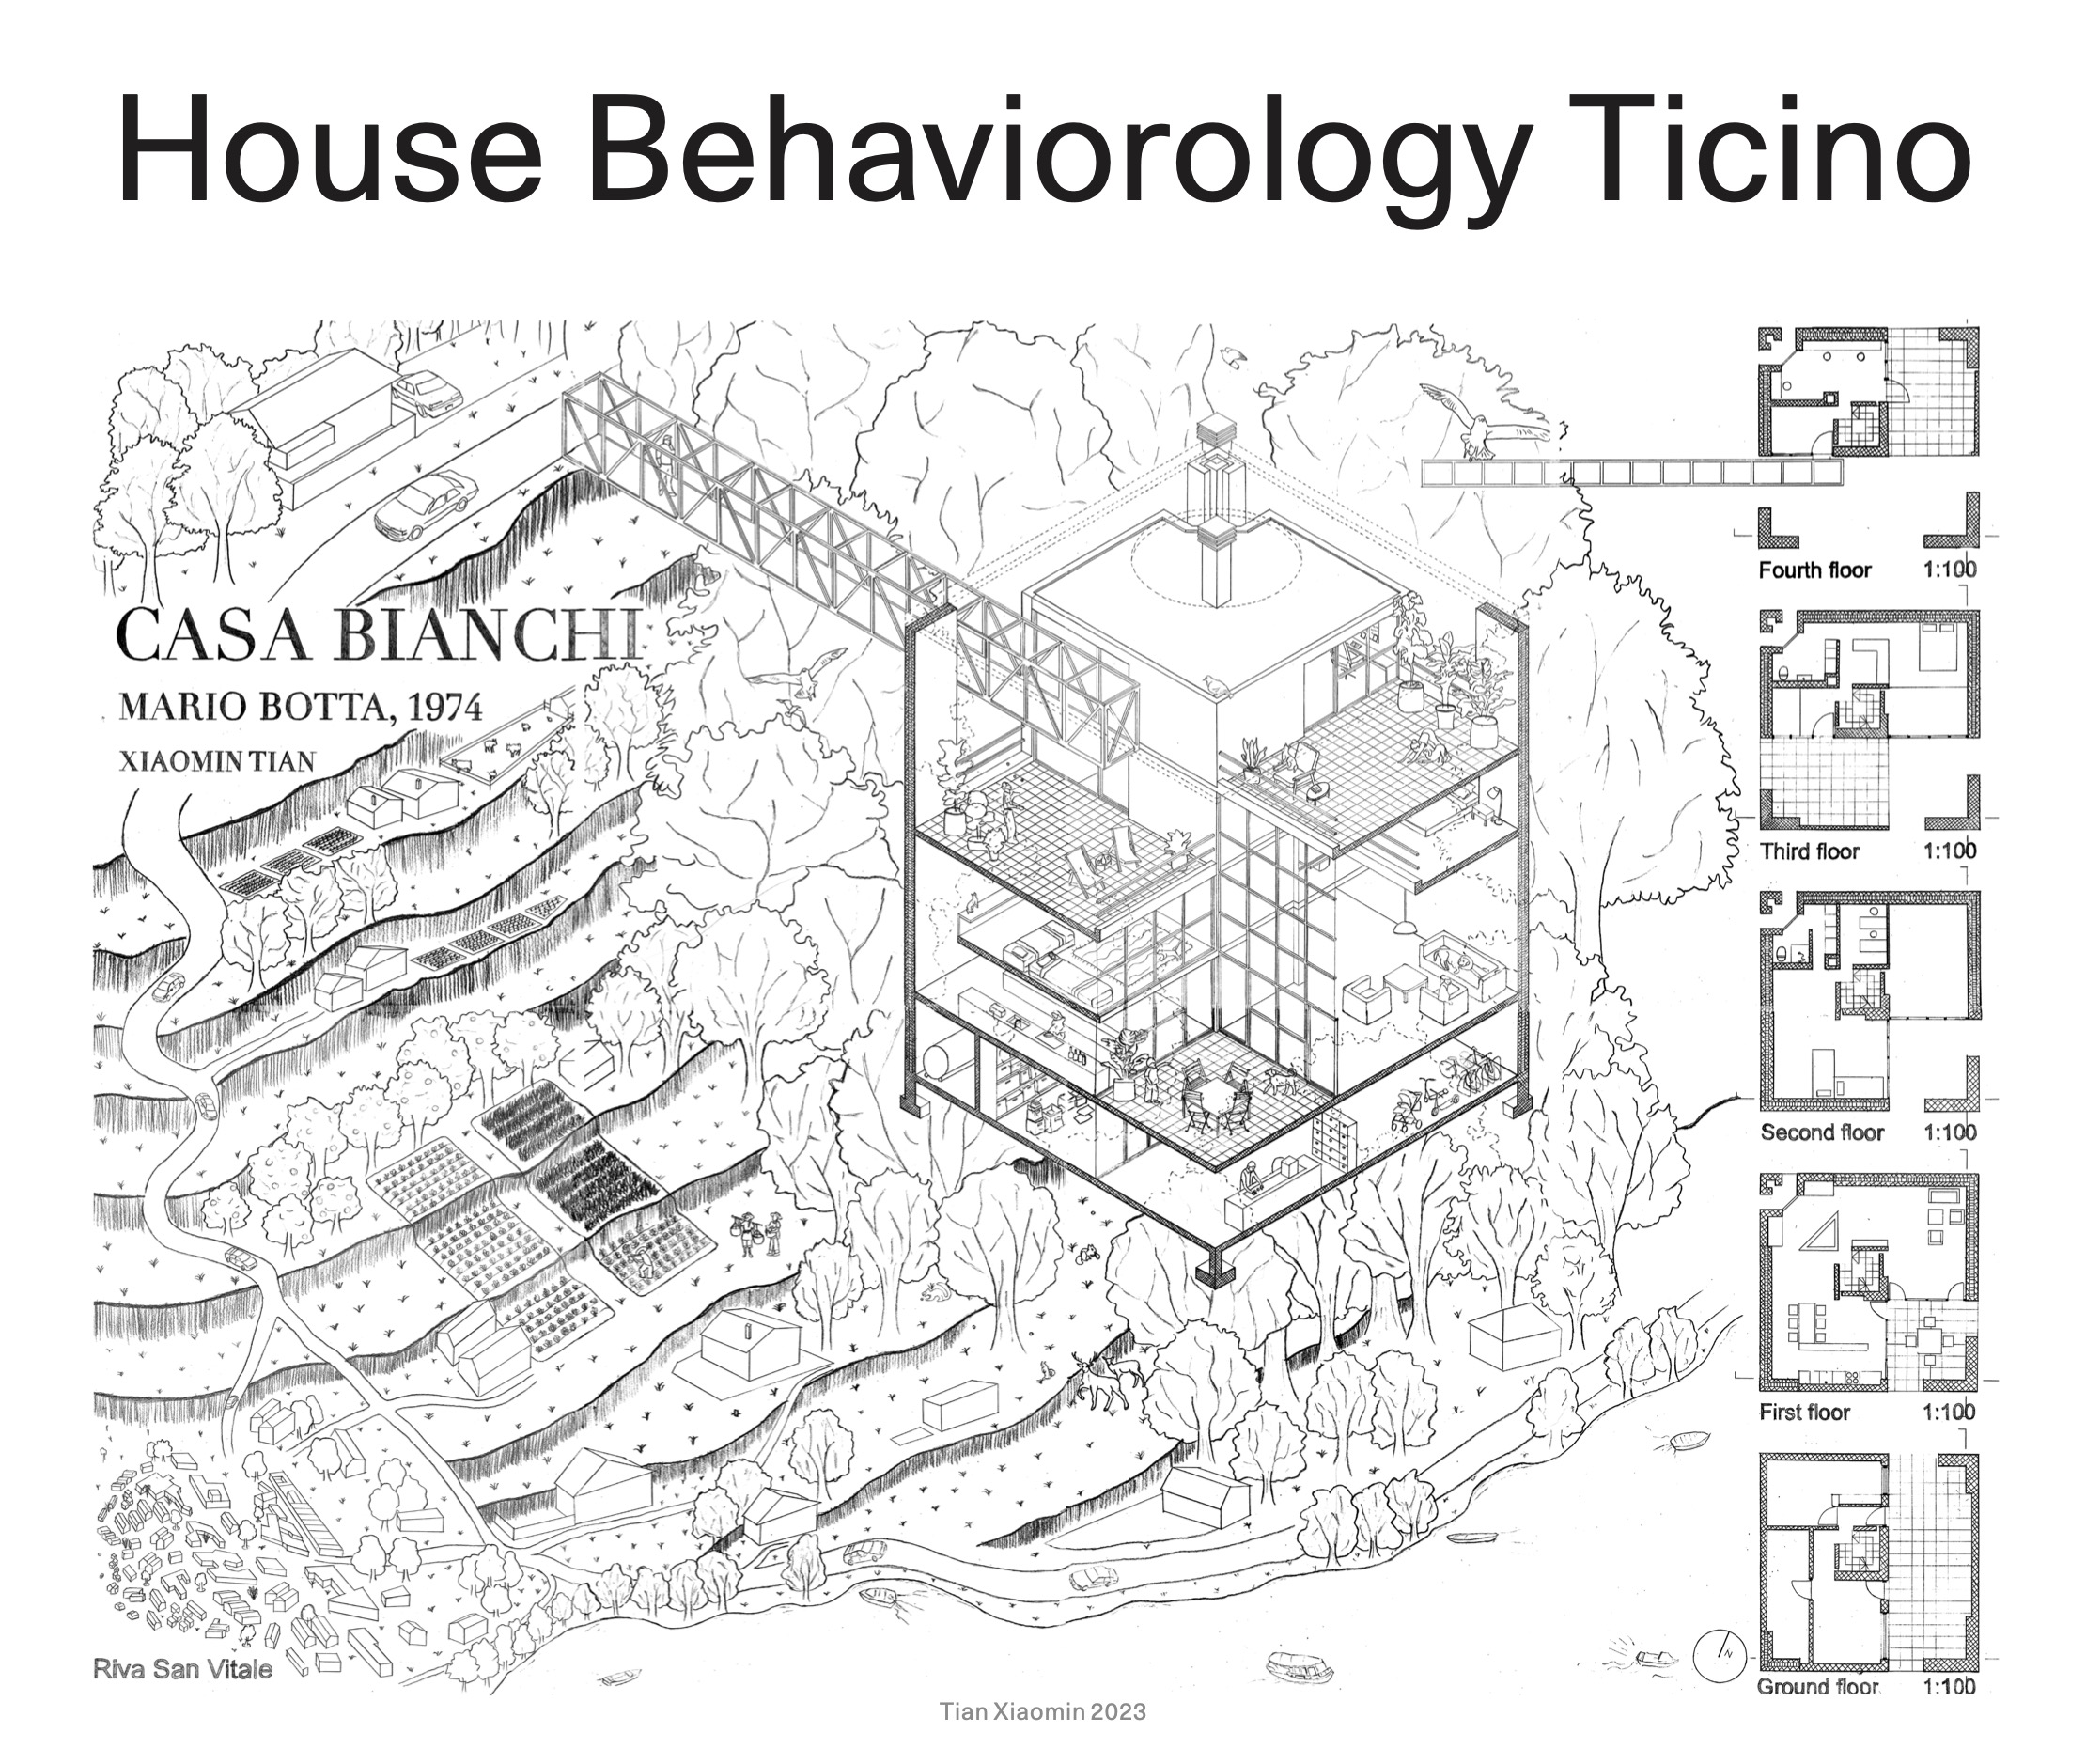 https://www.i2a.ch/mostra-house-behaviorology-in-ticino